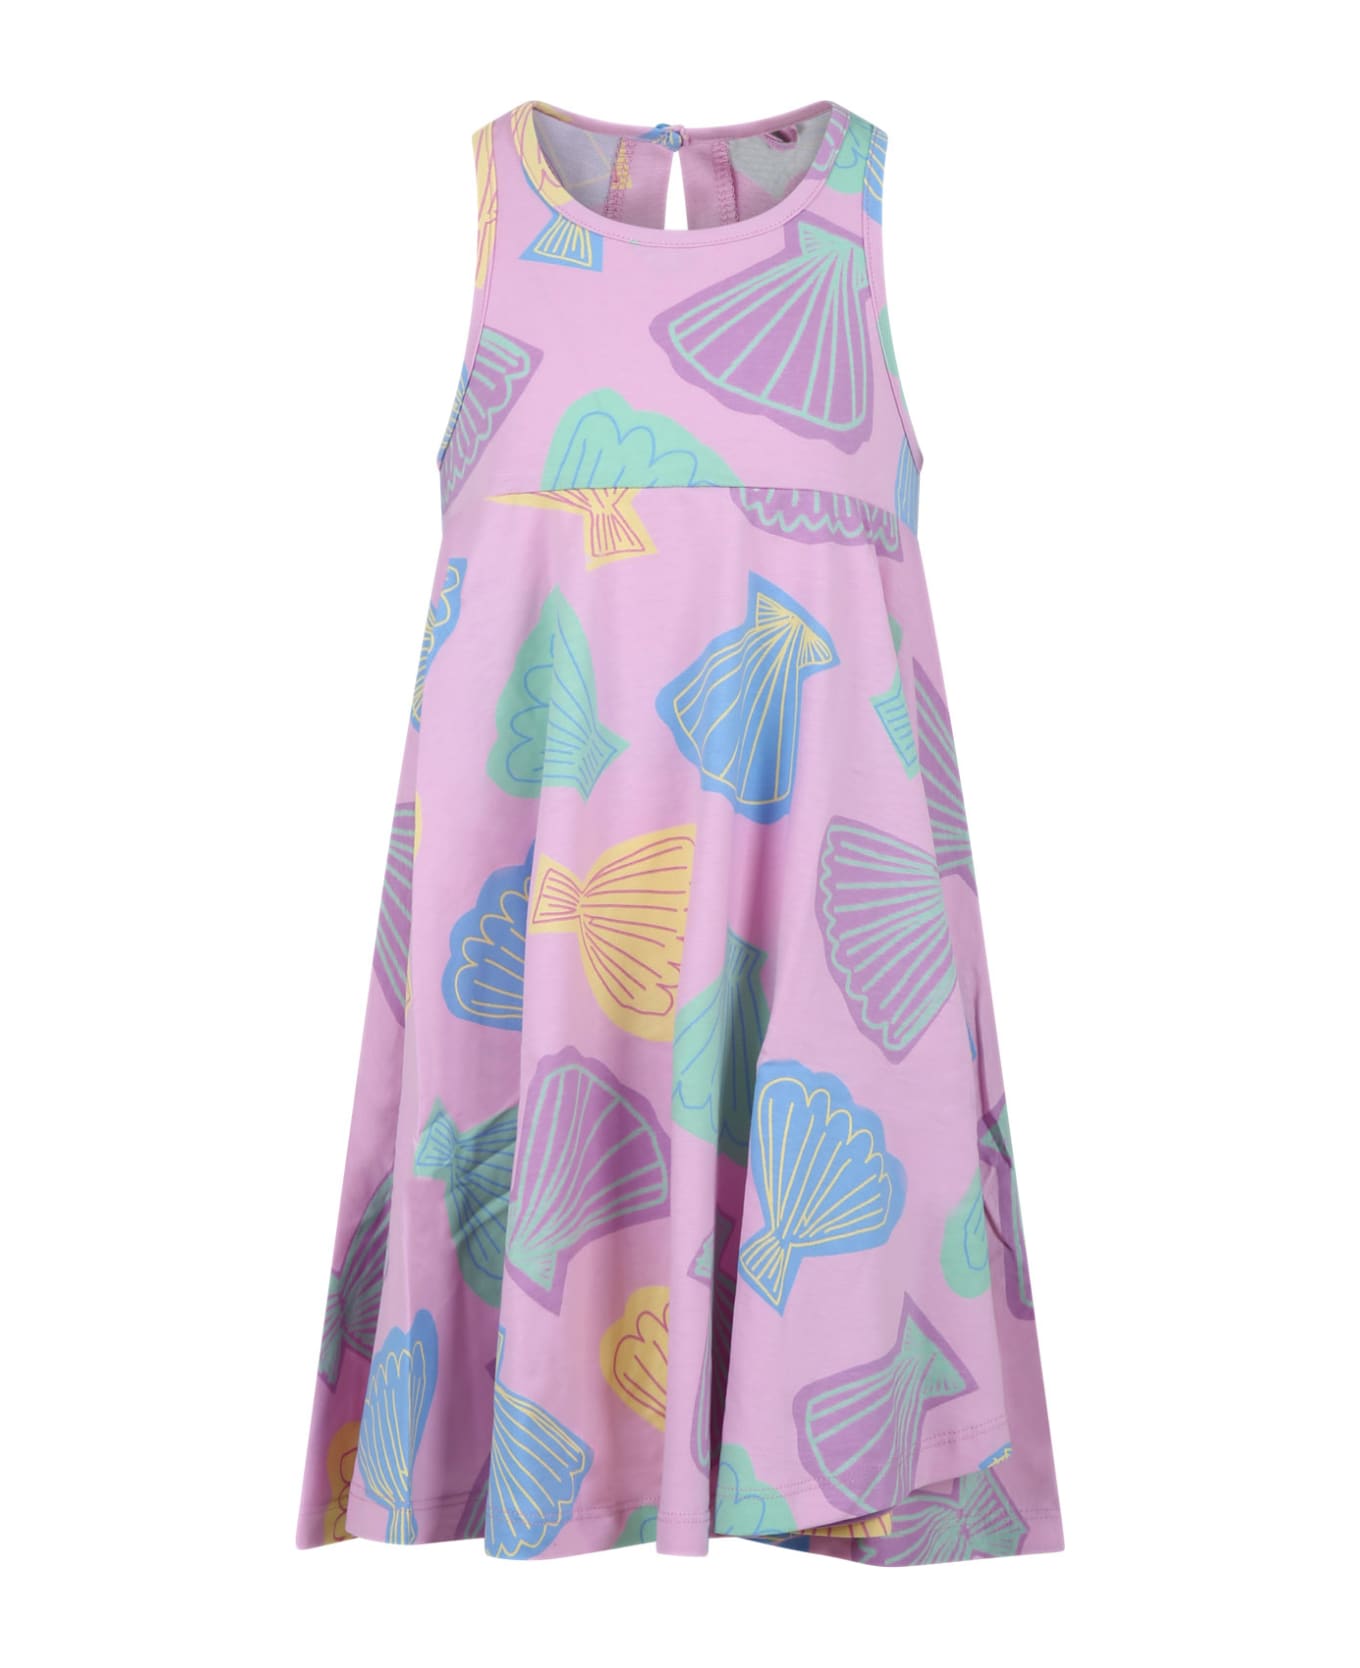 Stella McCartney Kids Pink Dress For Girl With All-over Multicolor Print - Pink ワンピース＆ドレス